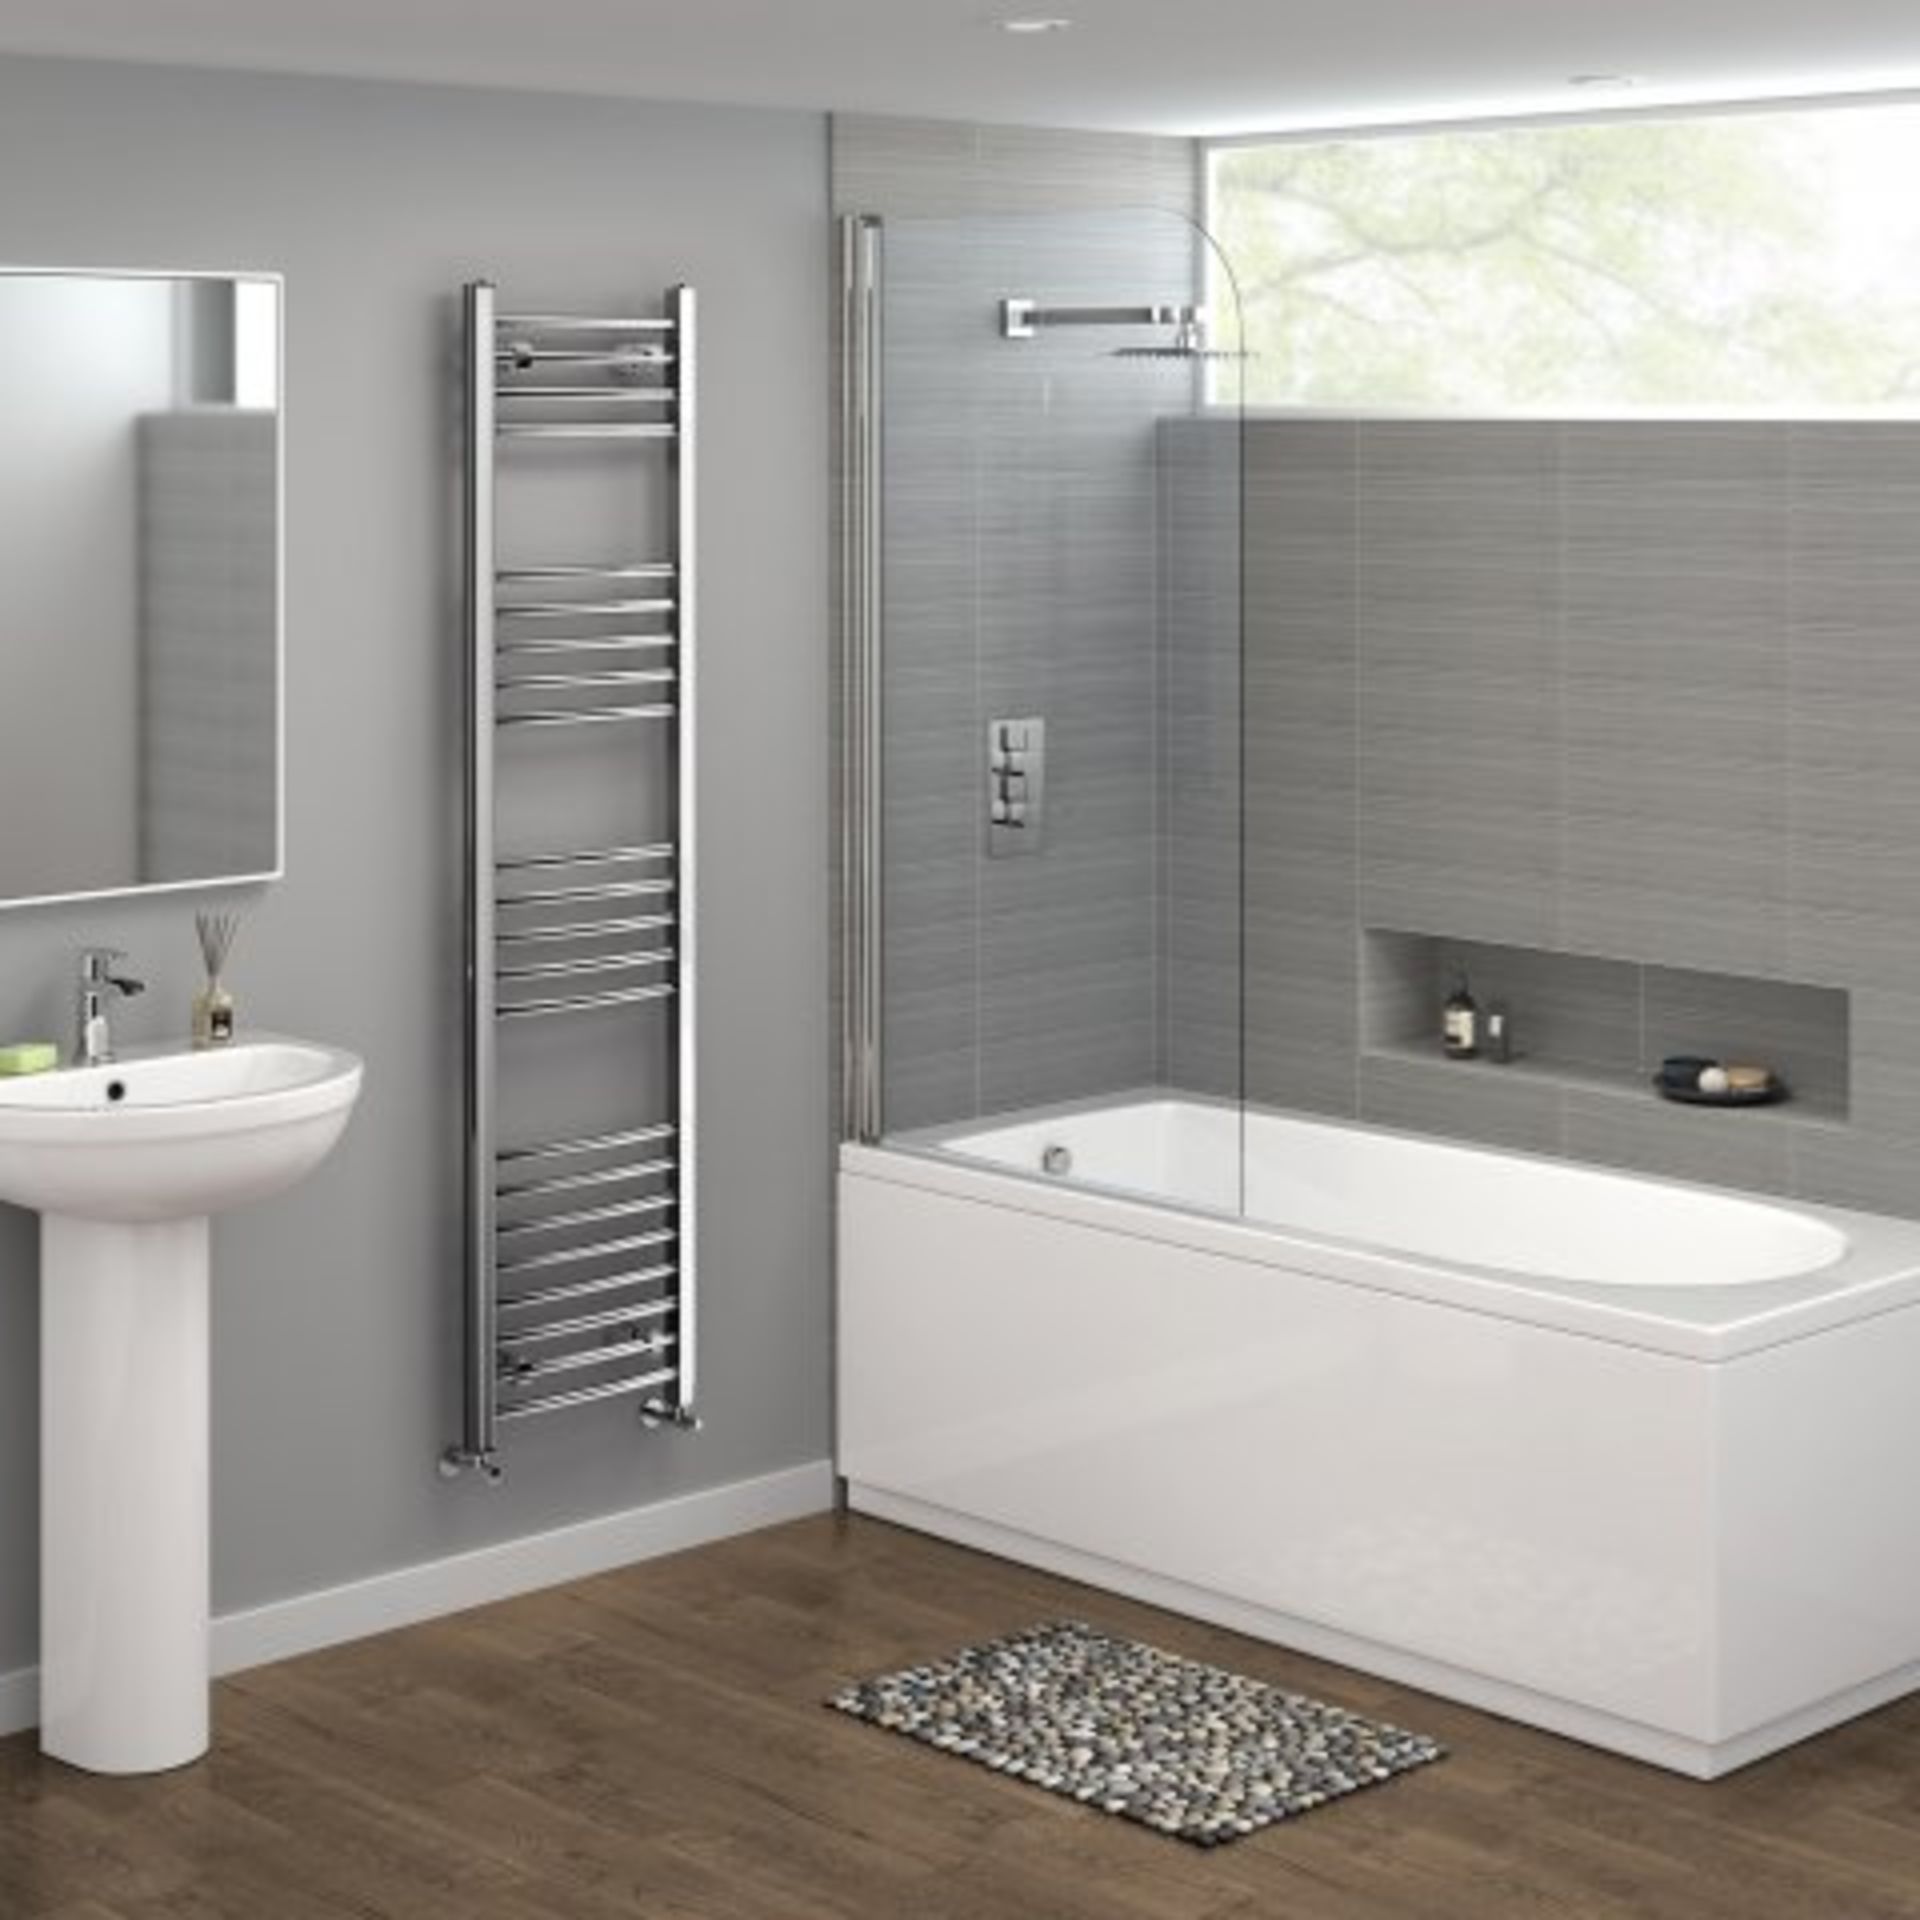 (H109) 1600x400mm - 20mm Tubes - Chrome Curved Rail Ladder Towel Radiator. Our Nancy 1600x400mm - Image 3 of 3